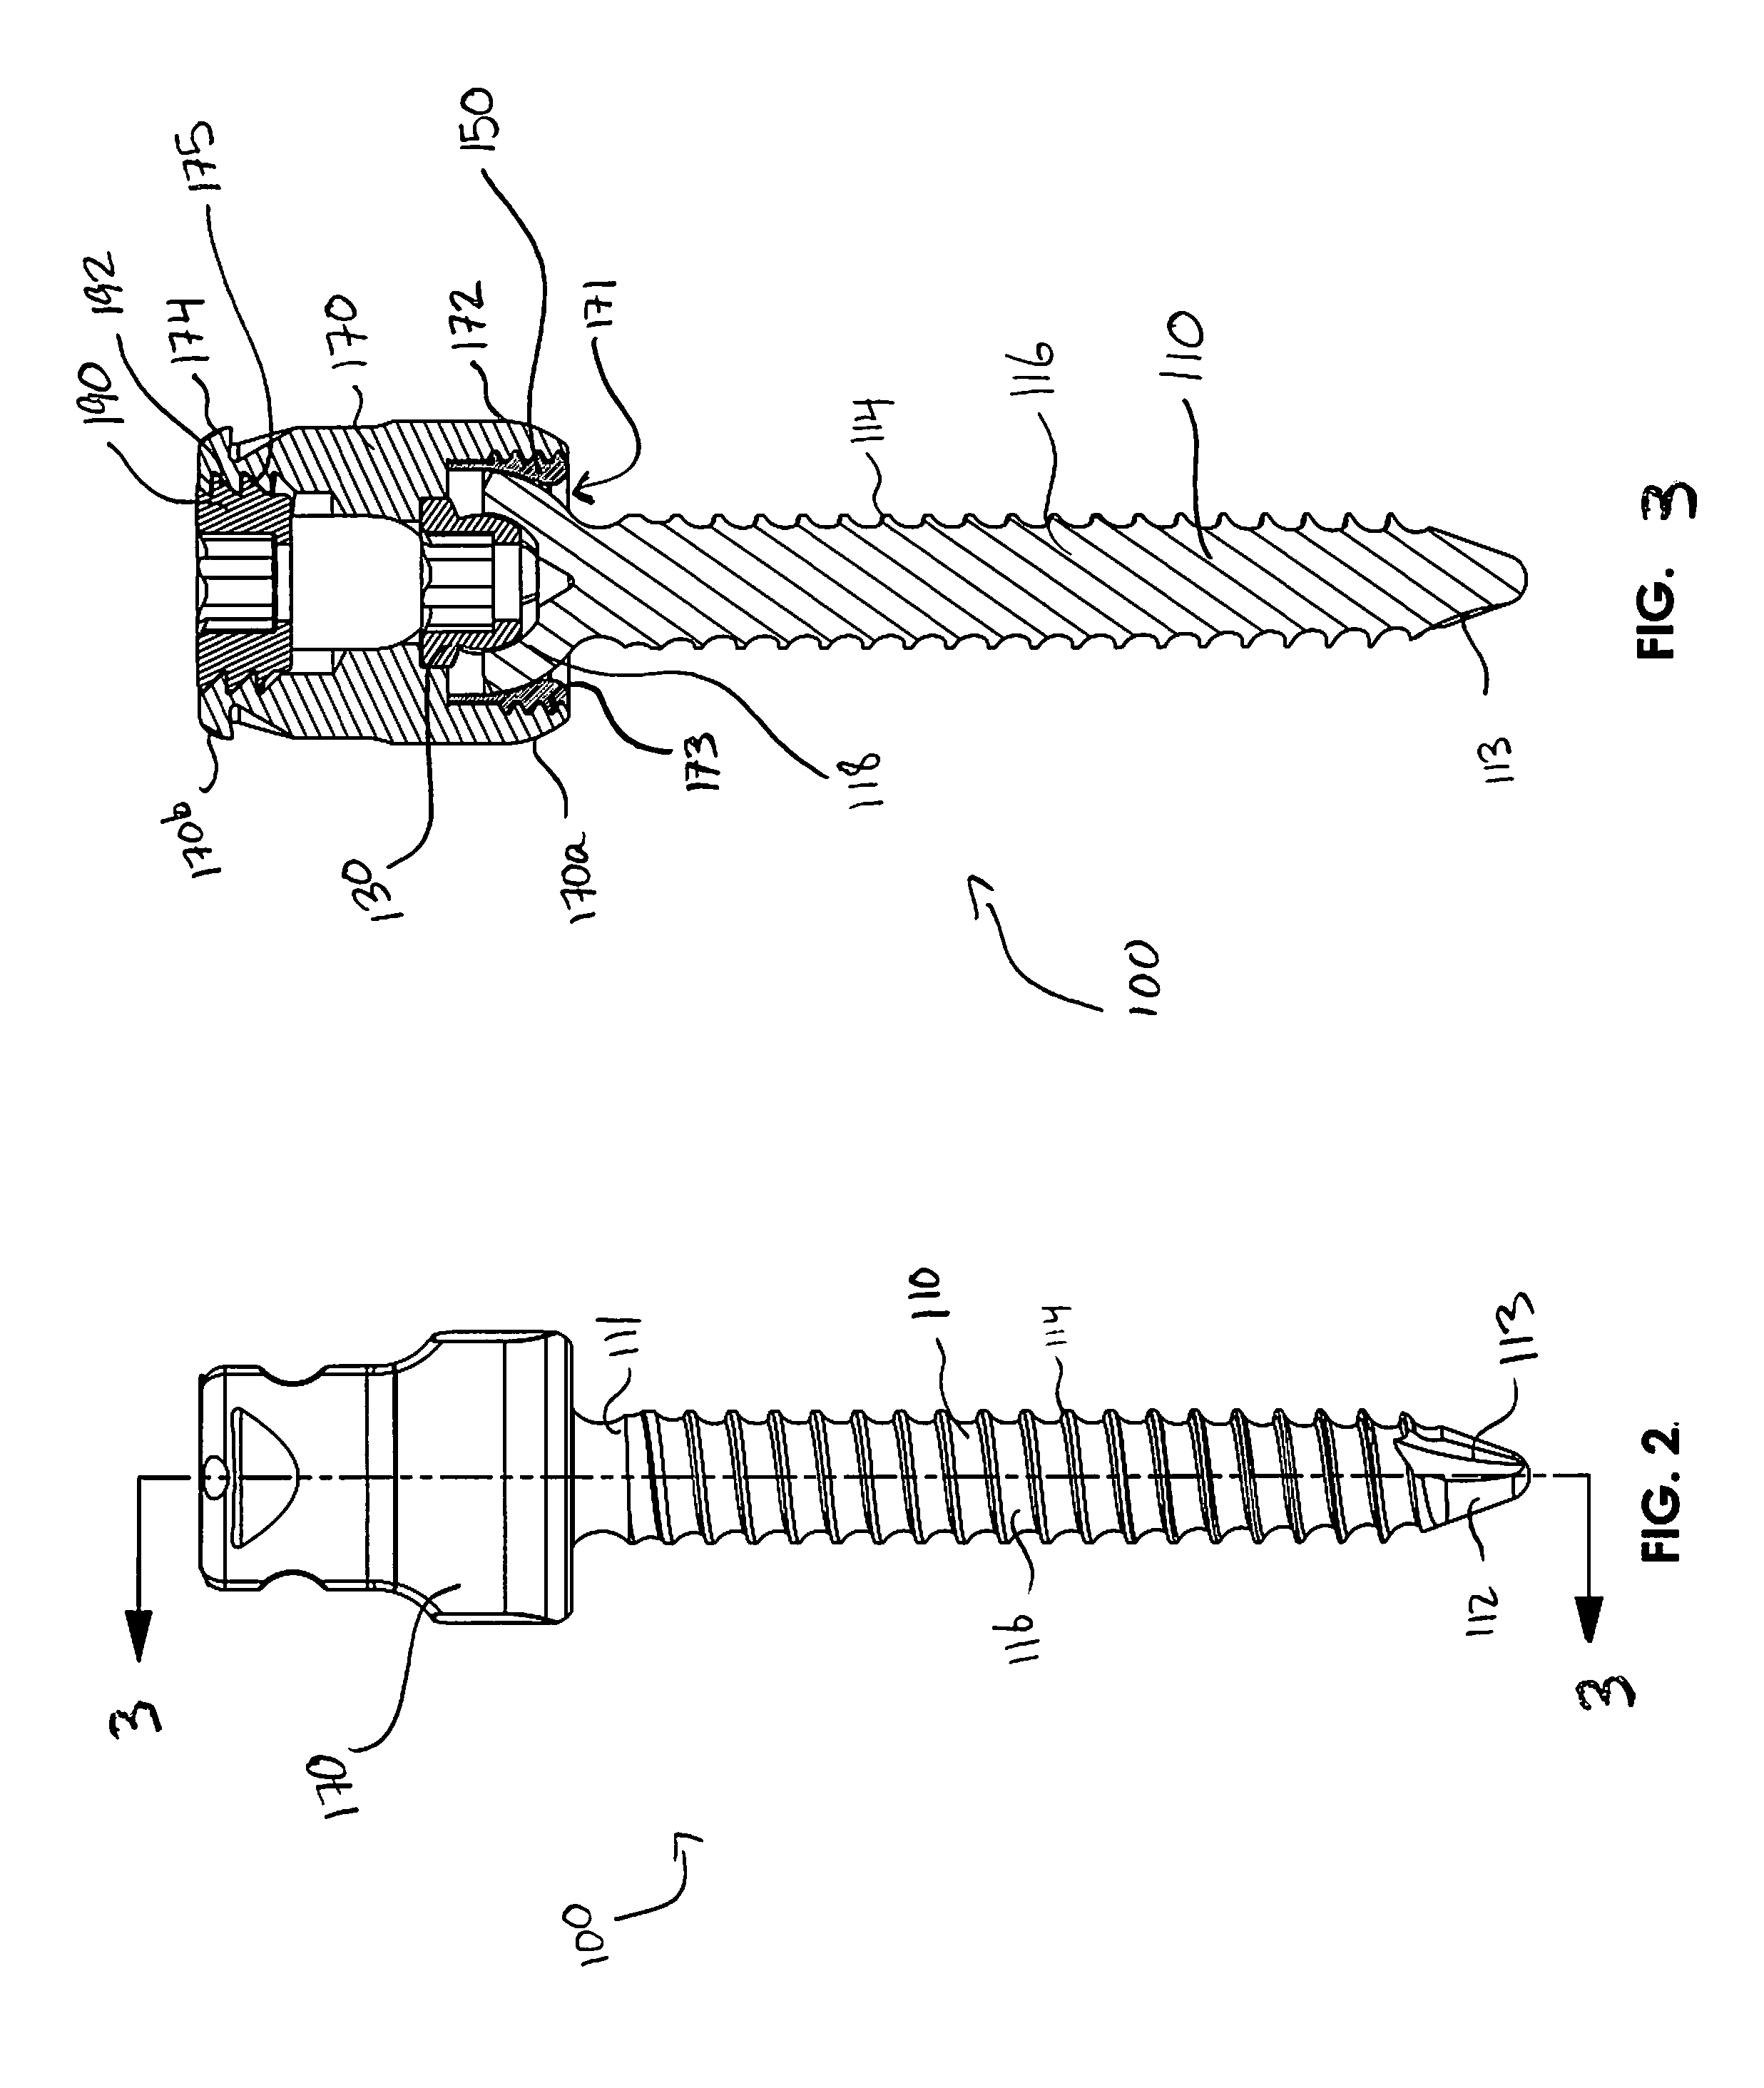 Bone screw assembly with non-uniform material